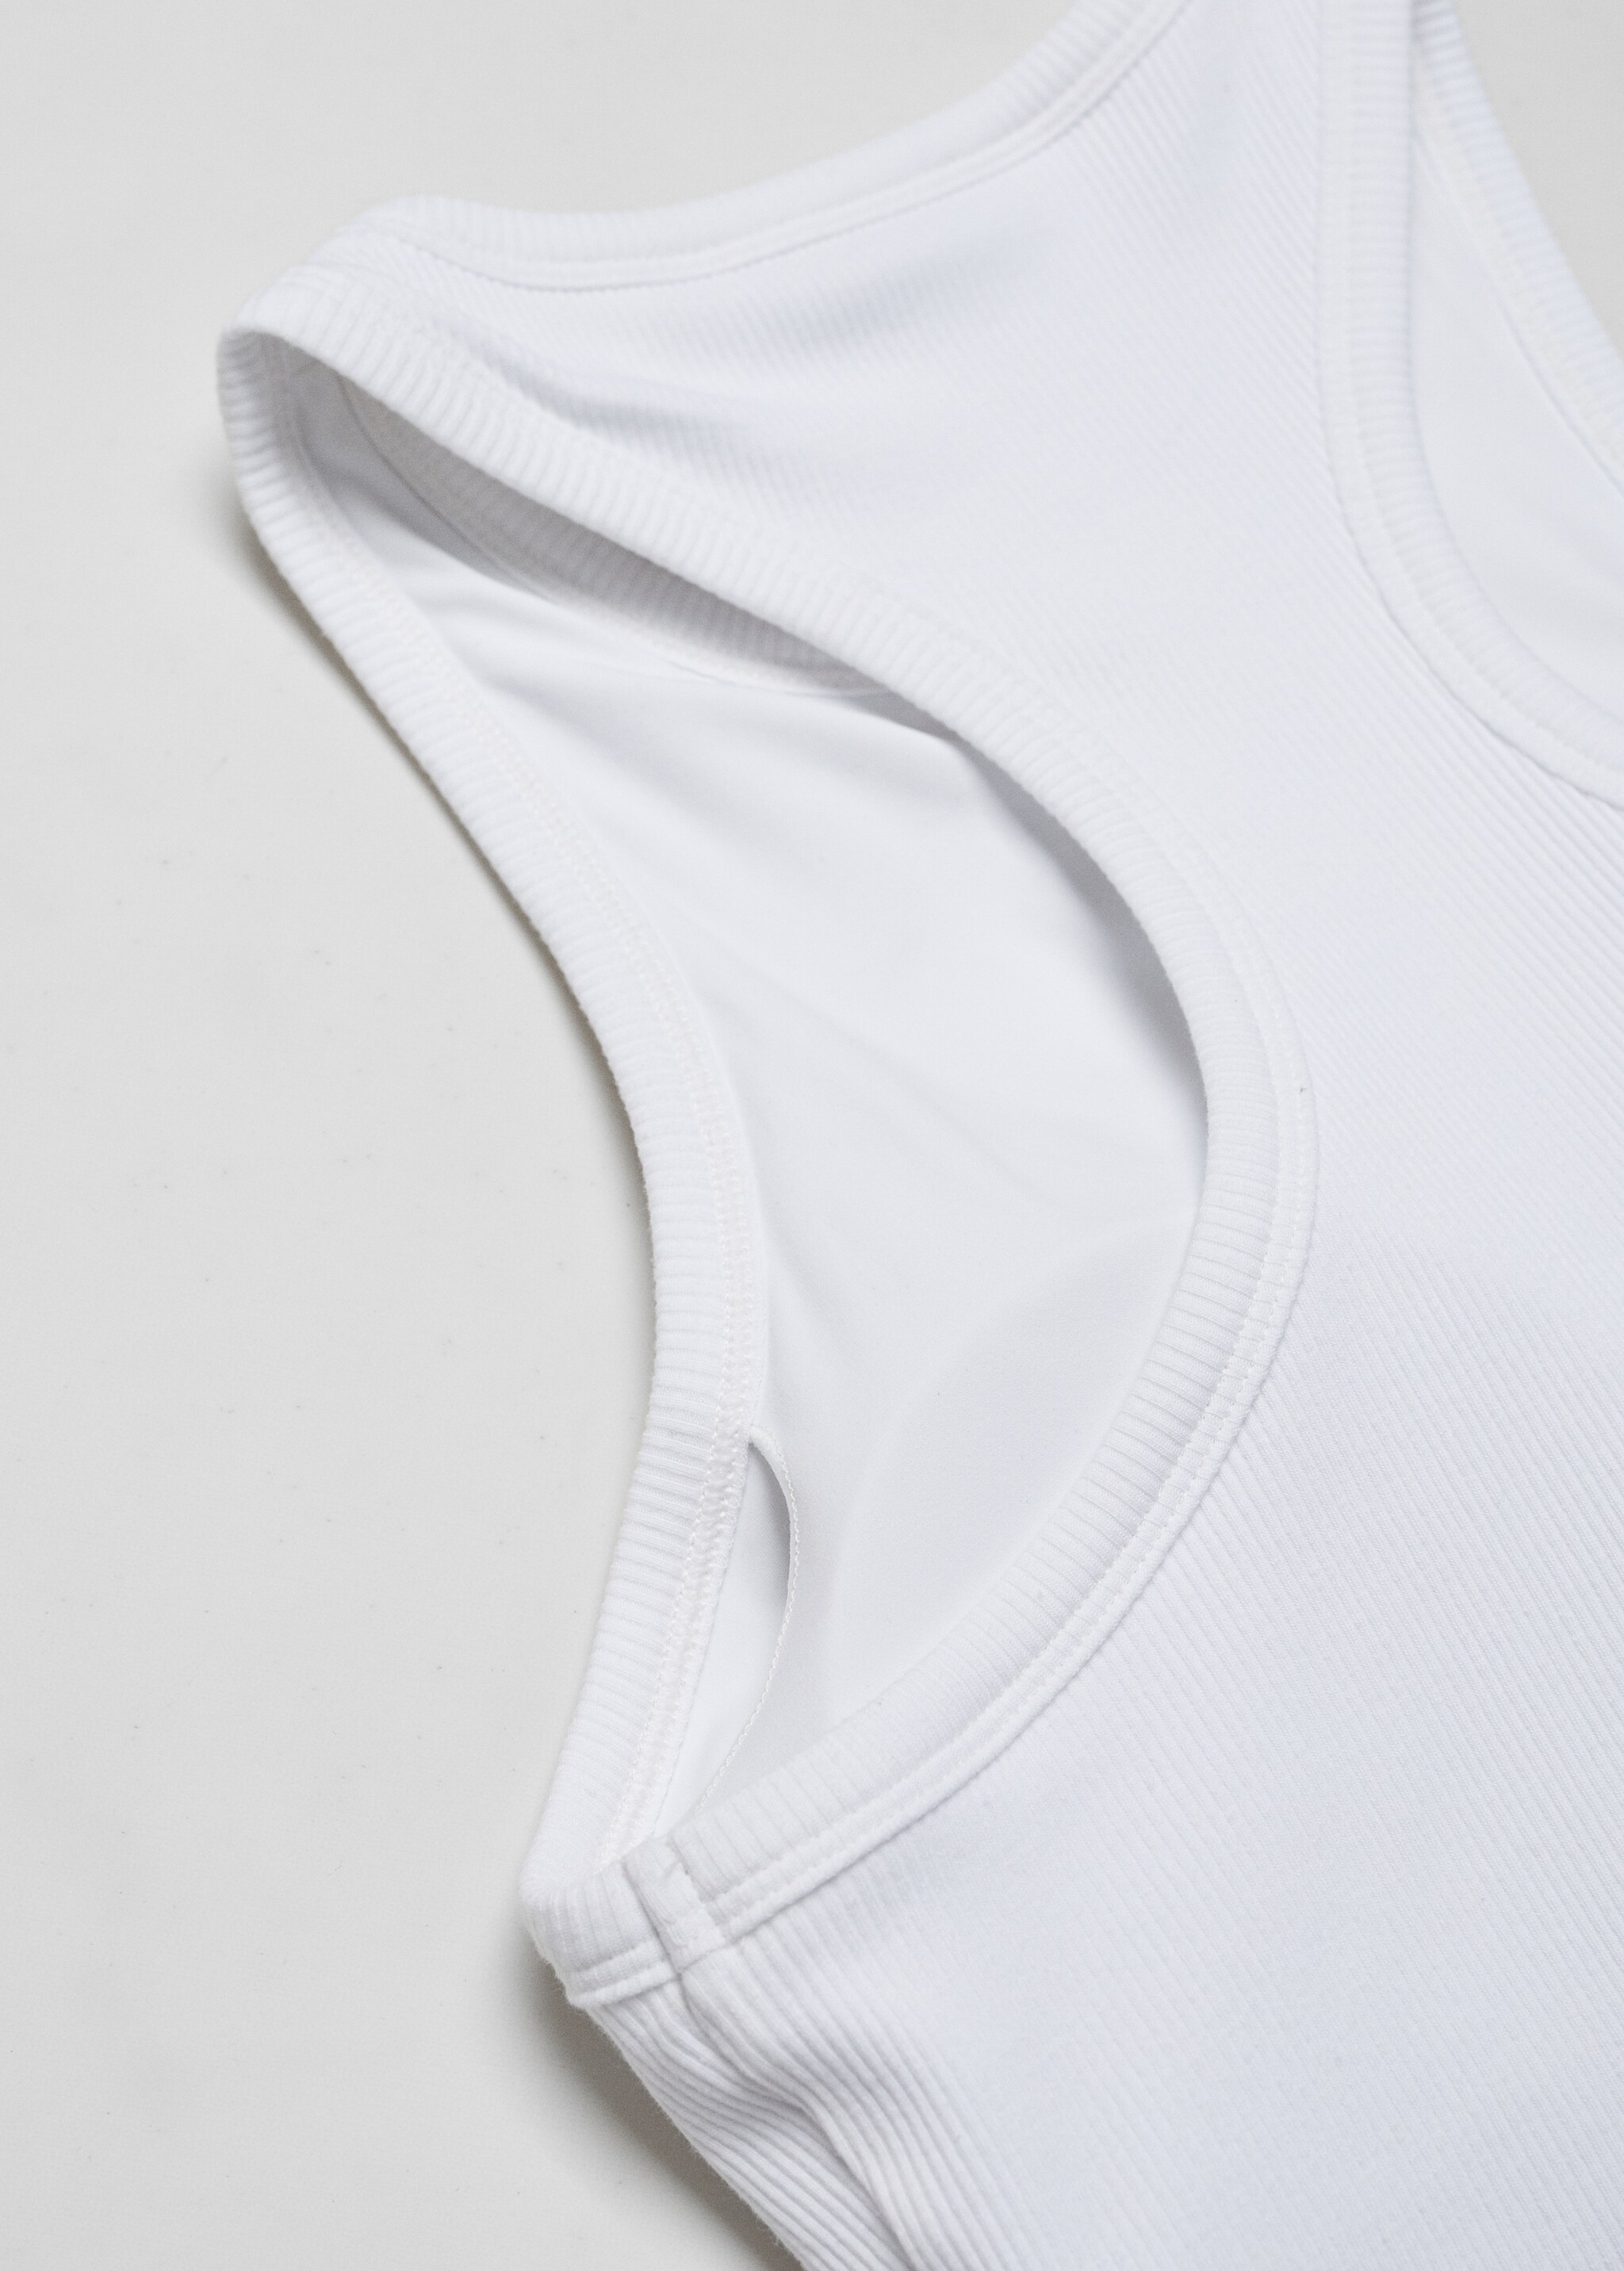 Halter top with low-cut back - Details of the article 8